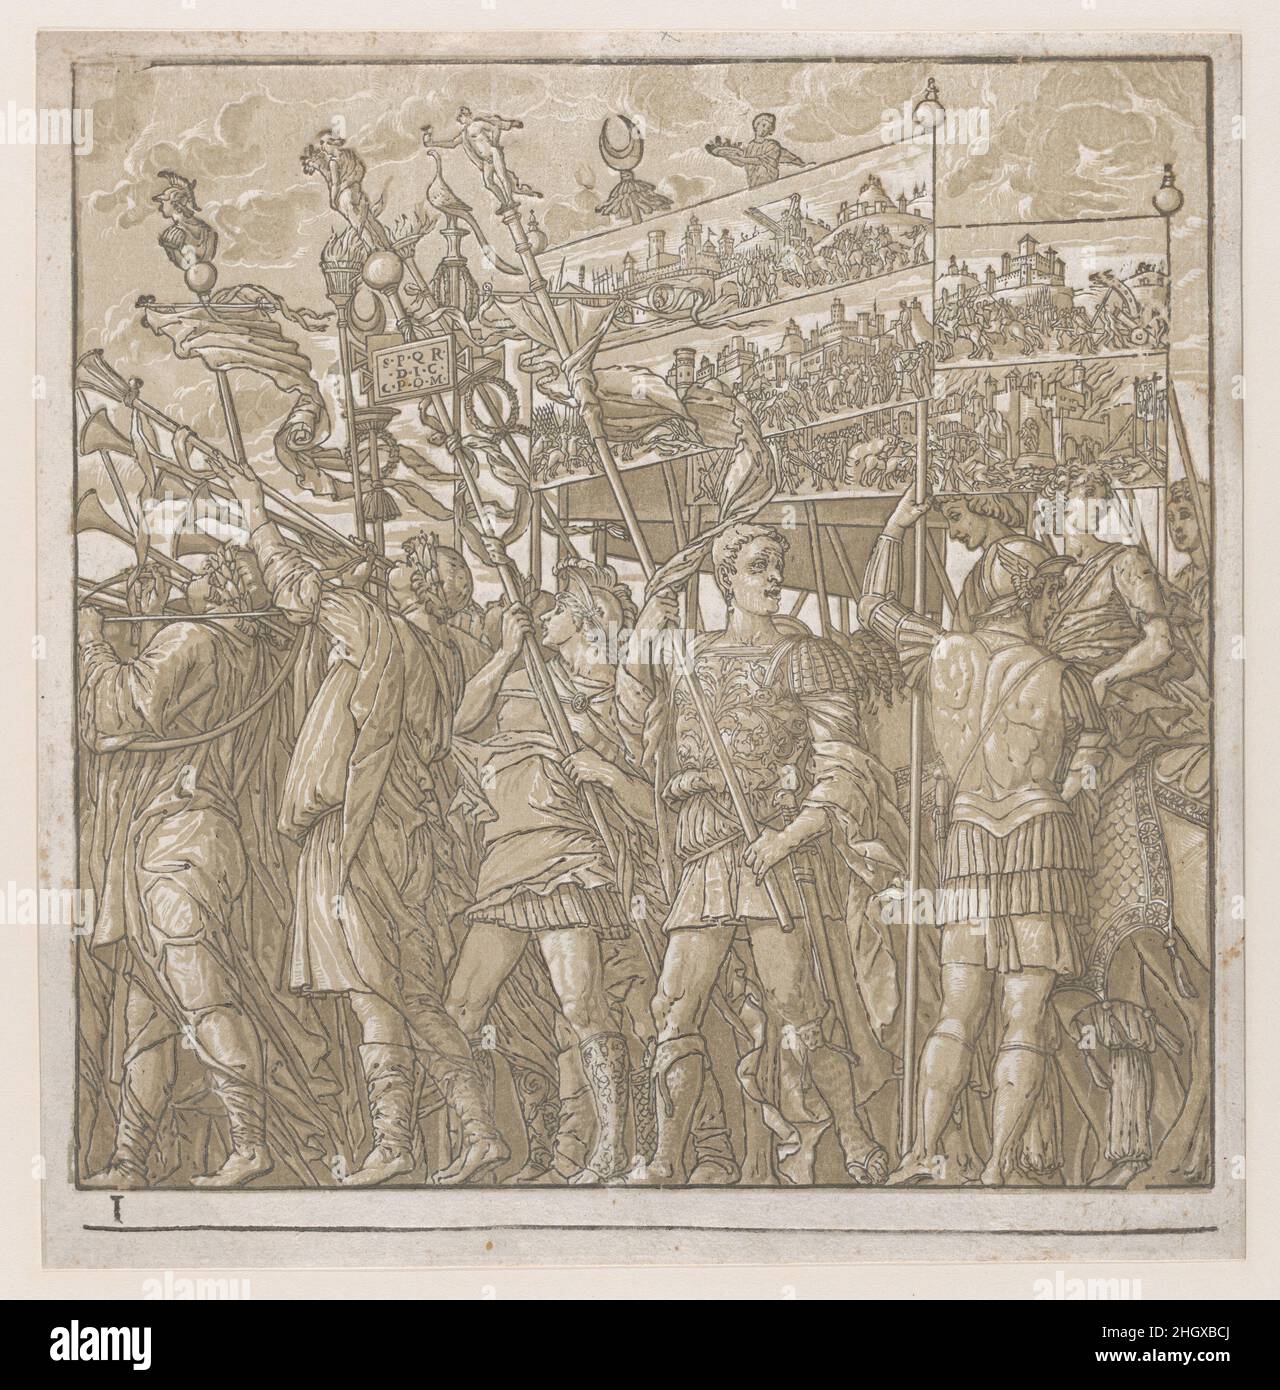 Sheet 1: Soldiers carrying banners depicting Julius Caesar's triumphant military exploits, from The Triumph of Julius Caesar 1599 Andrea Andreani Italian. Sheet 1: Soldiers carrying banners depicting Julius Caesar's triumphant military exploits, from The Triumph of Julius Caesar. Andrea Andreani (Italian, Mantua 1558/1559–1629). 1599. Chiaroscuro woodcut from two blocks in light brown ink. Prints Stock Photo